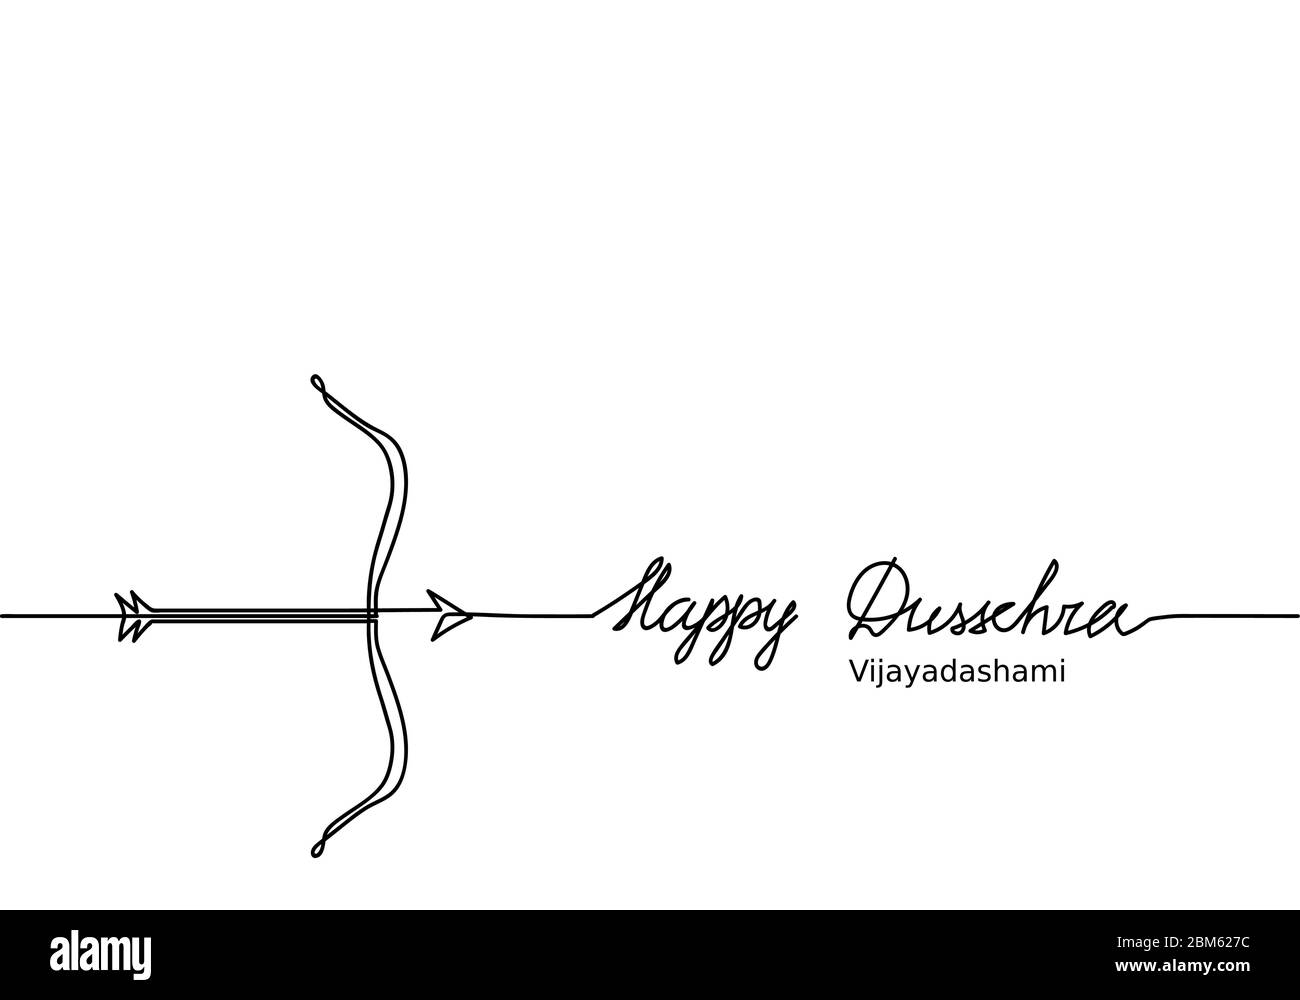 Dussehra Cut Out Stock Images & Pictures - Alamy